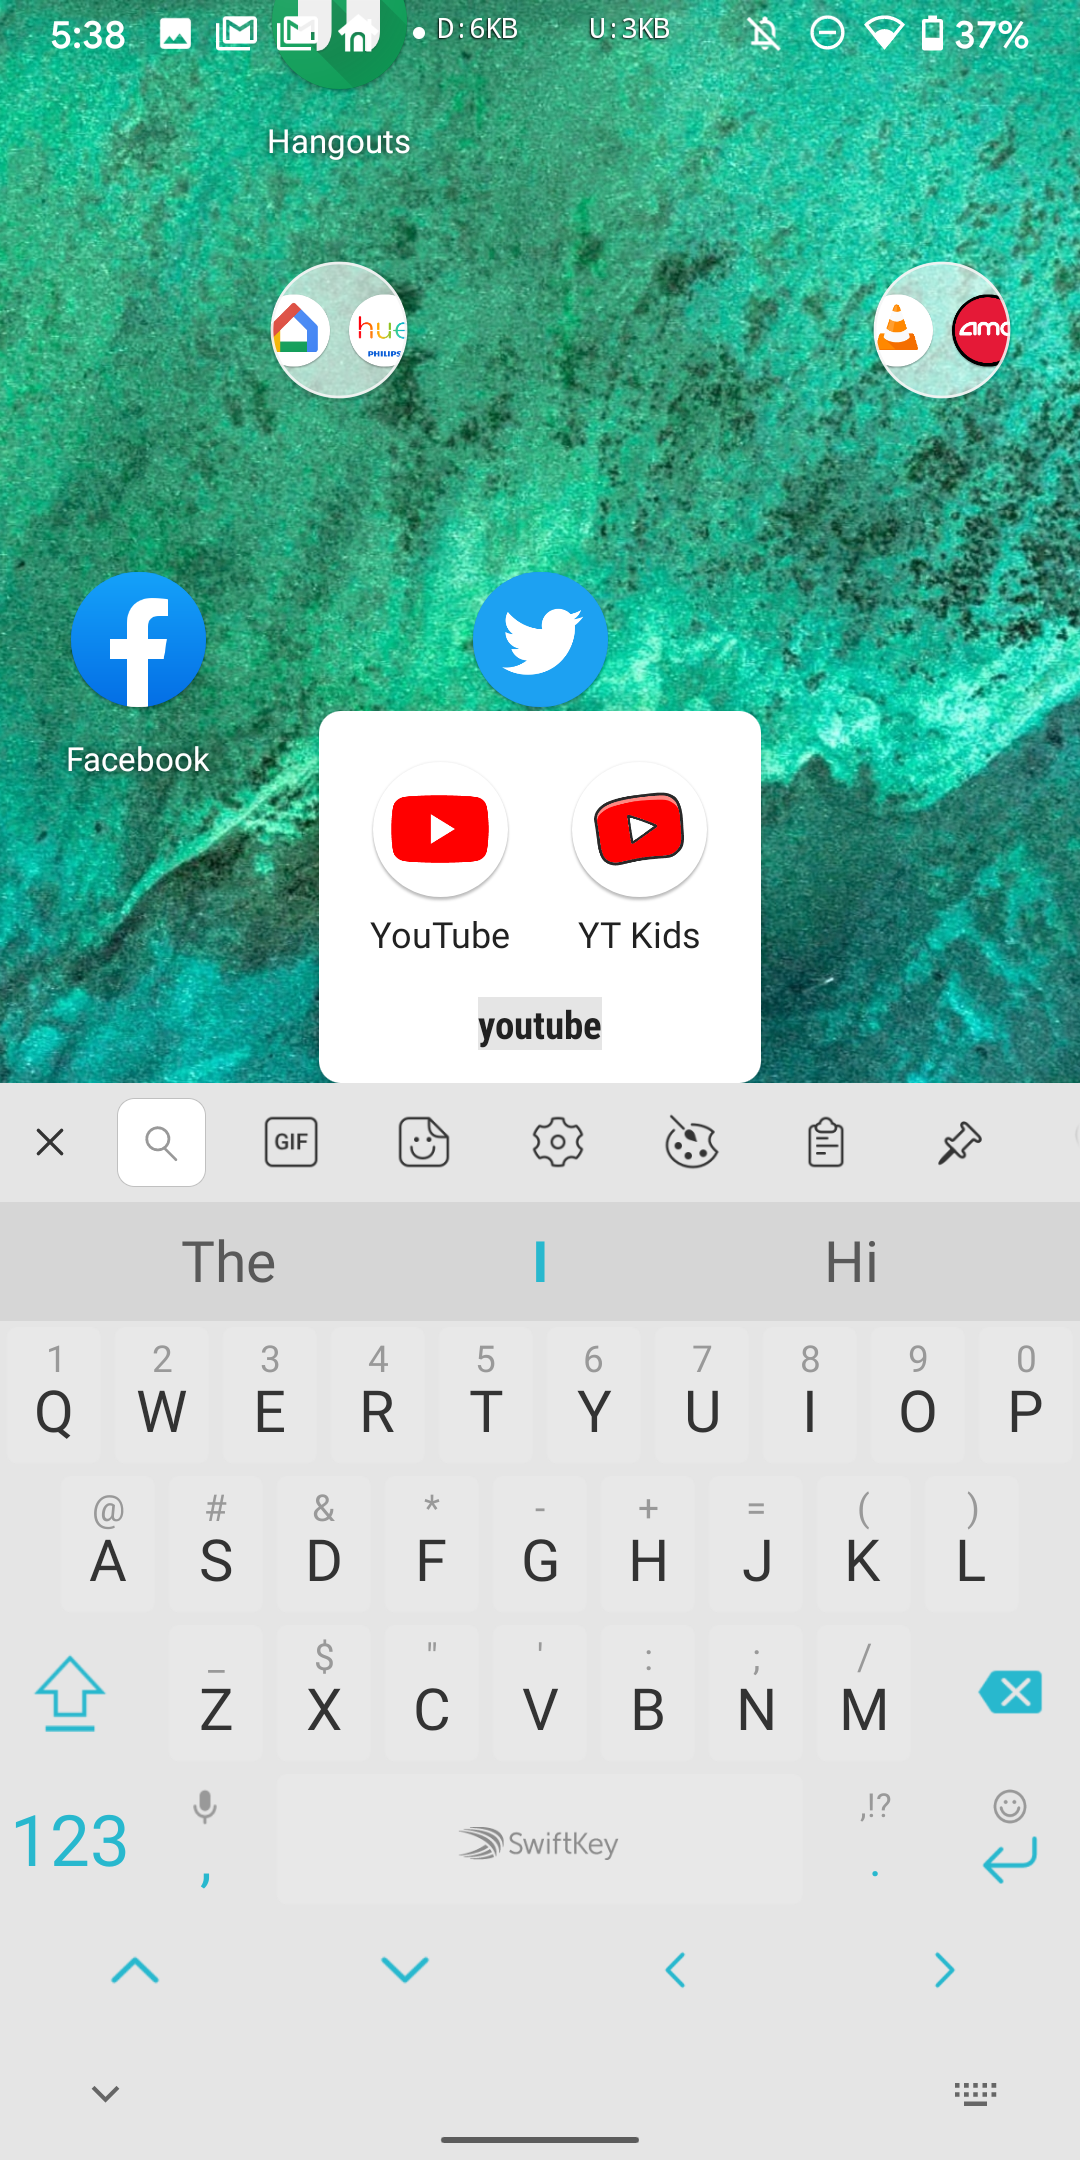 Folder name suggestion recommending youtube for YouTube and YT kids in a folder